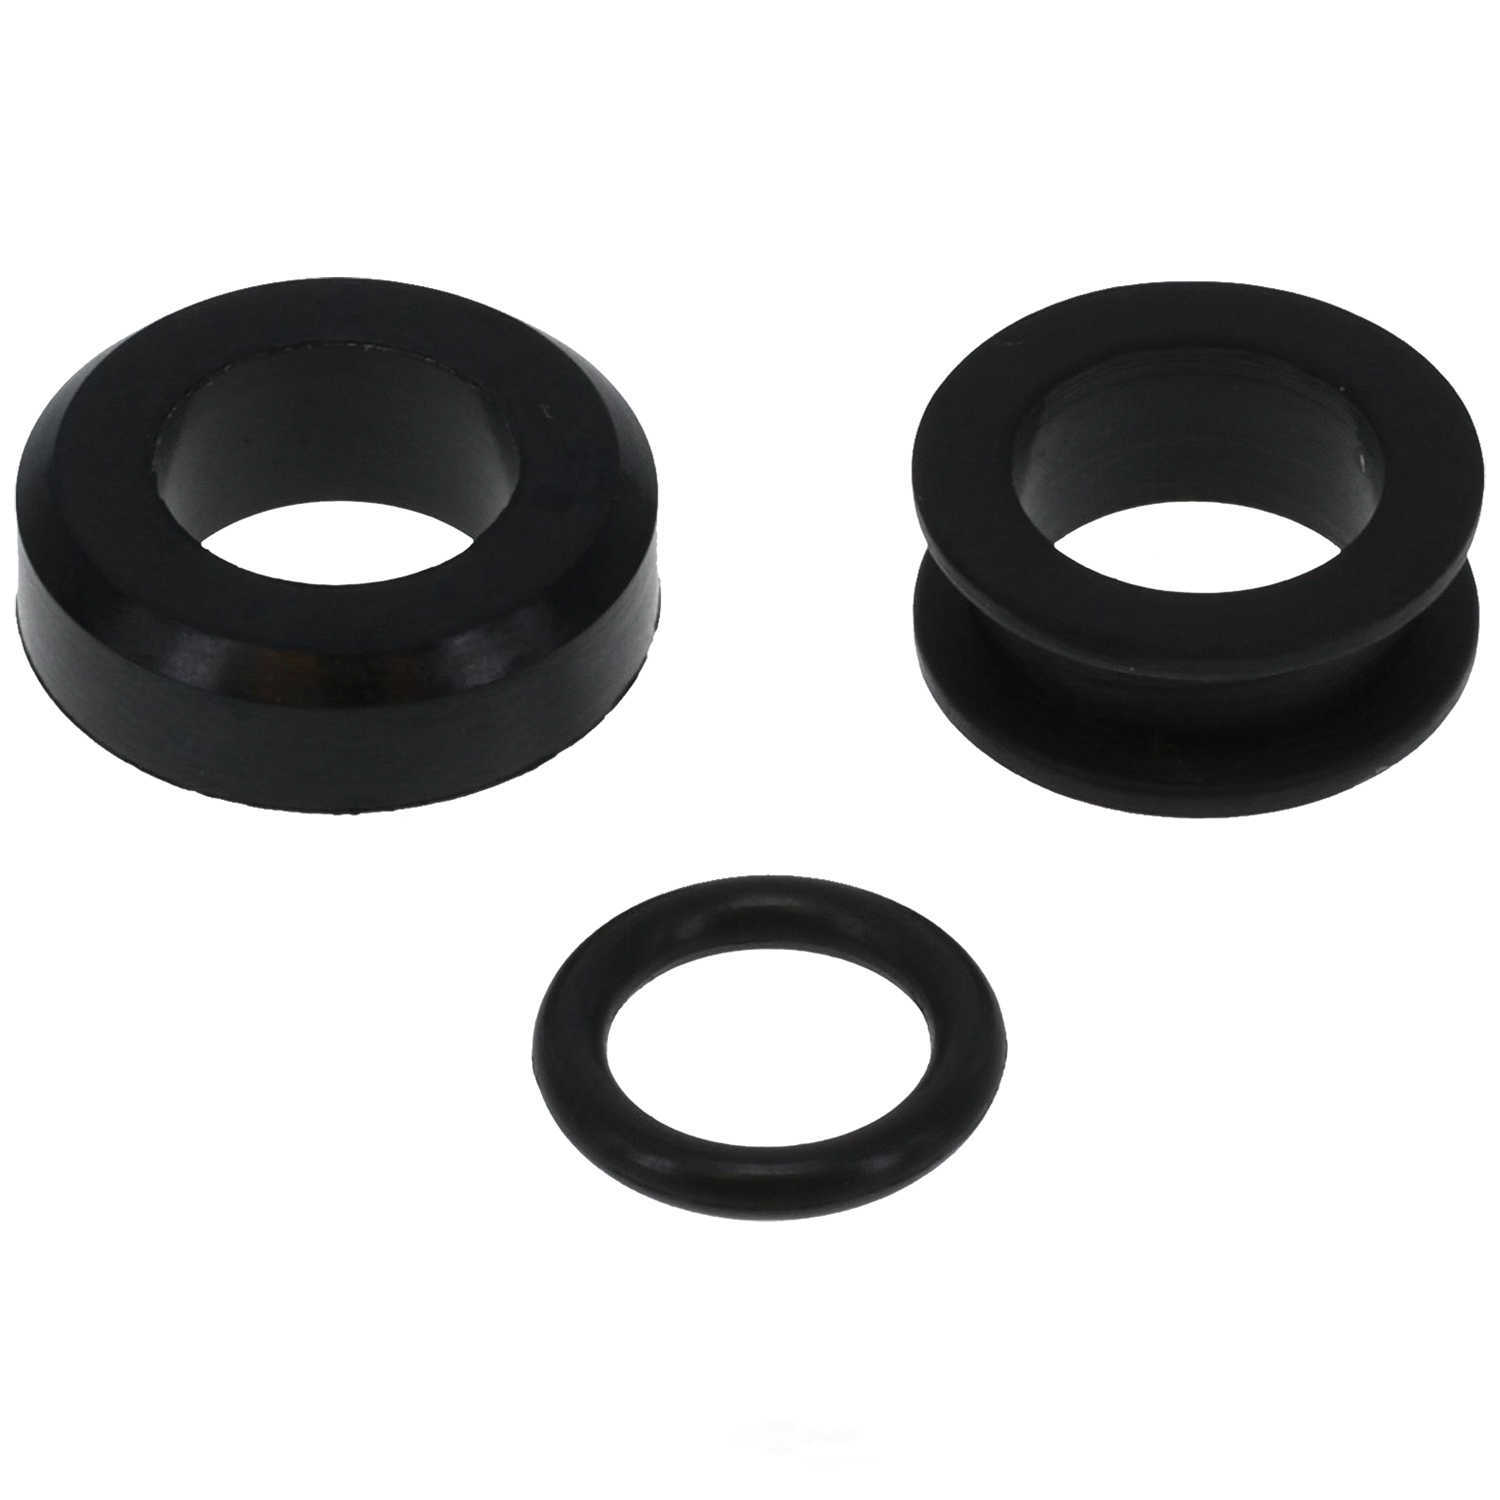 GB REMANUFACTURING INC. - Fuel Injector Seal Kit - GBR 8-024A